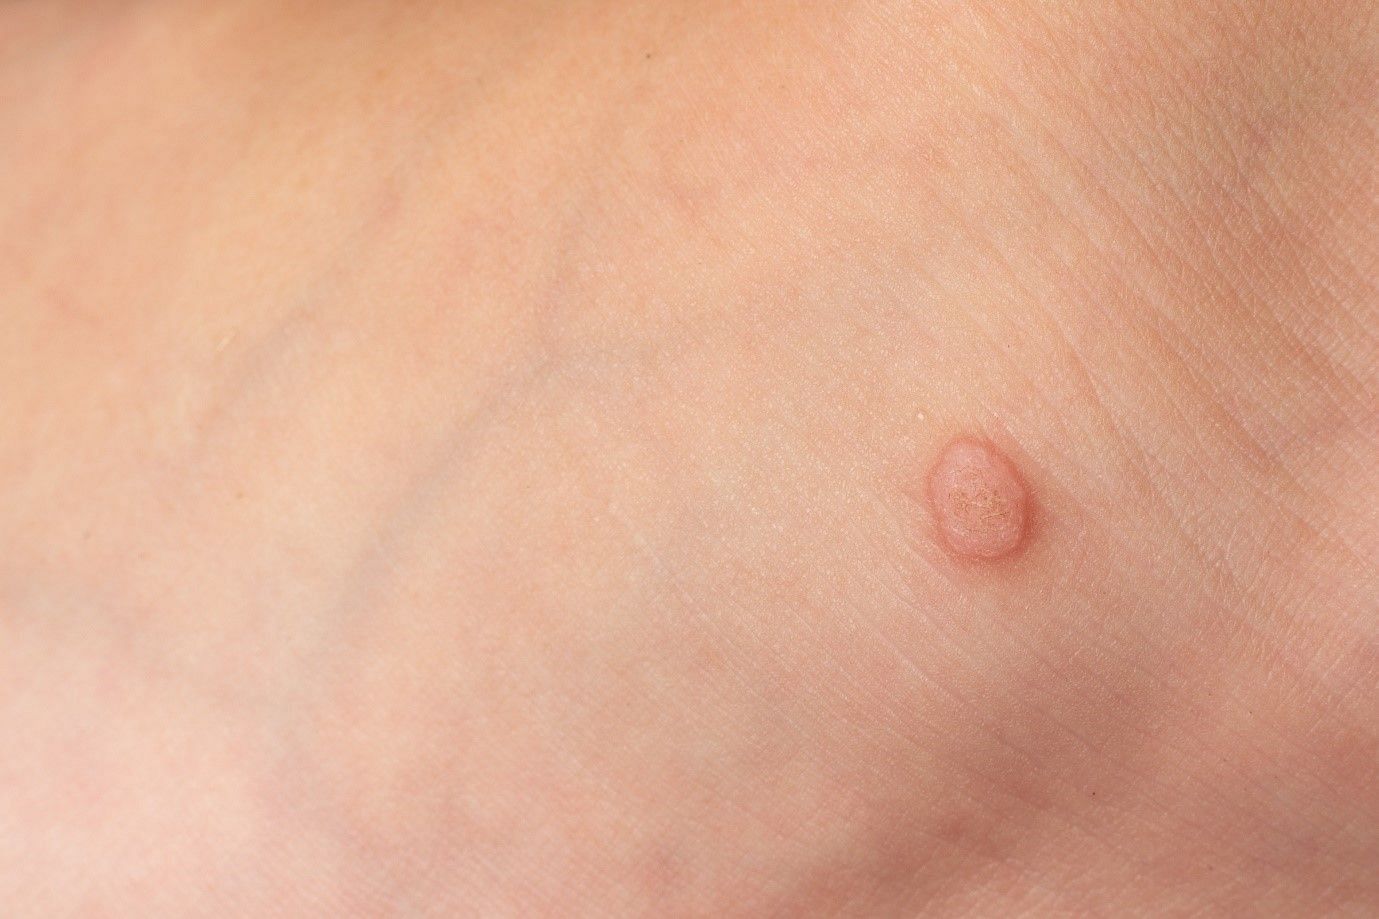 Dangling Skin Tags are expected to go away more easily. (Image by Dali_photo on Vecteezy)